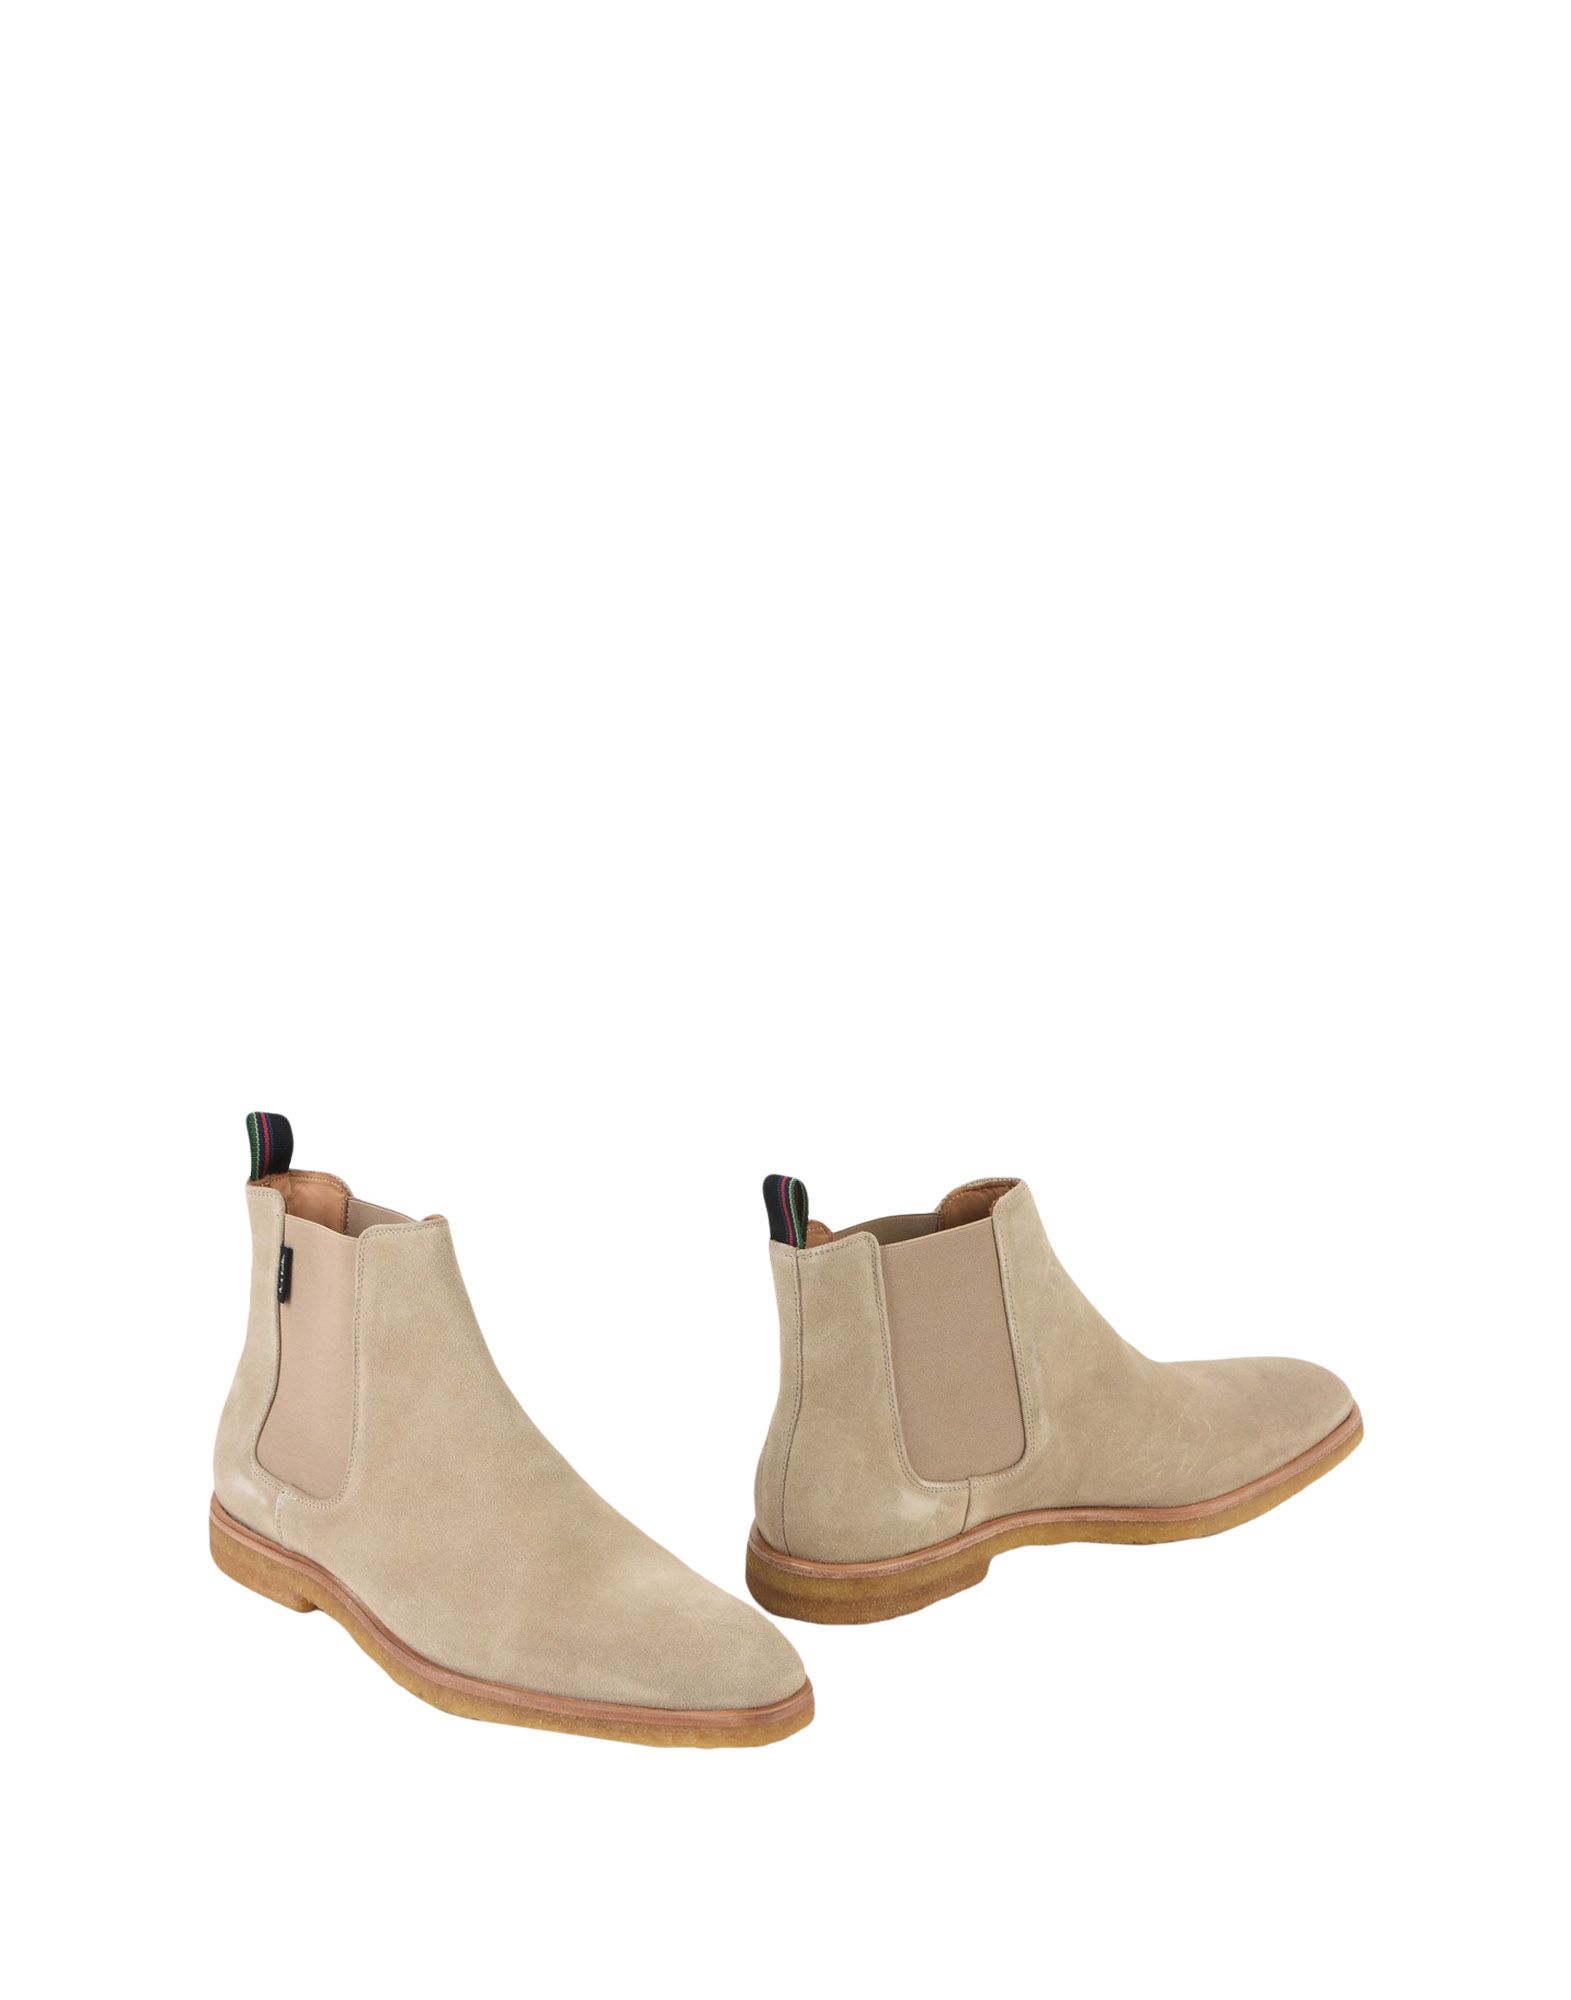 PS BY PAUL SMITH Boots,11503773UV 13